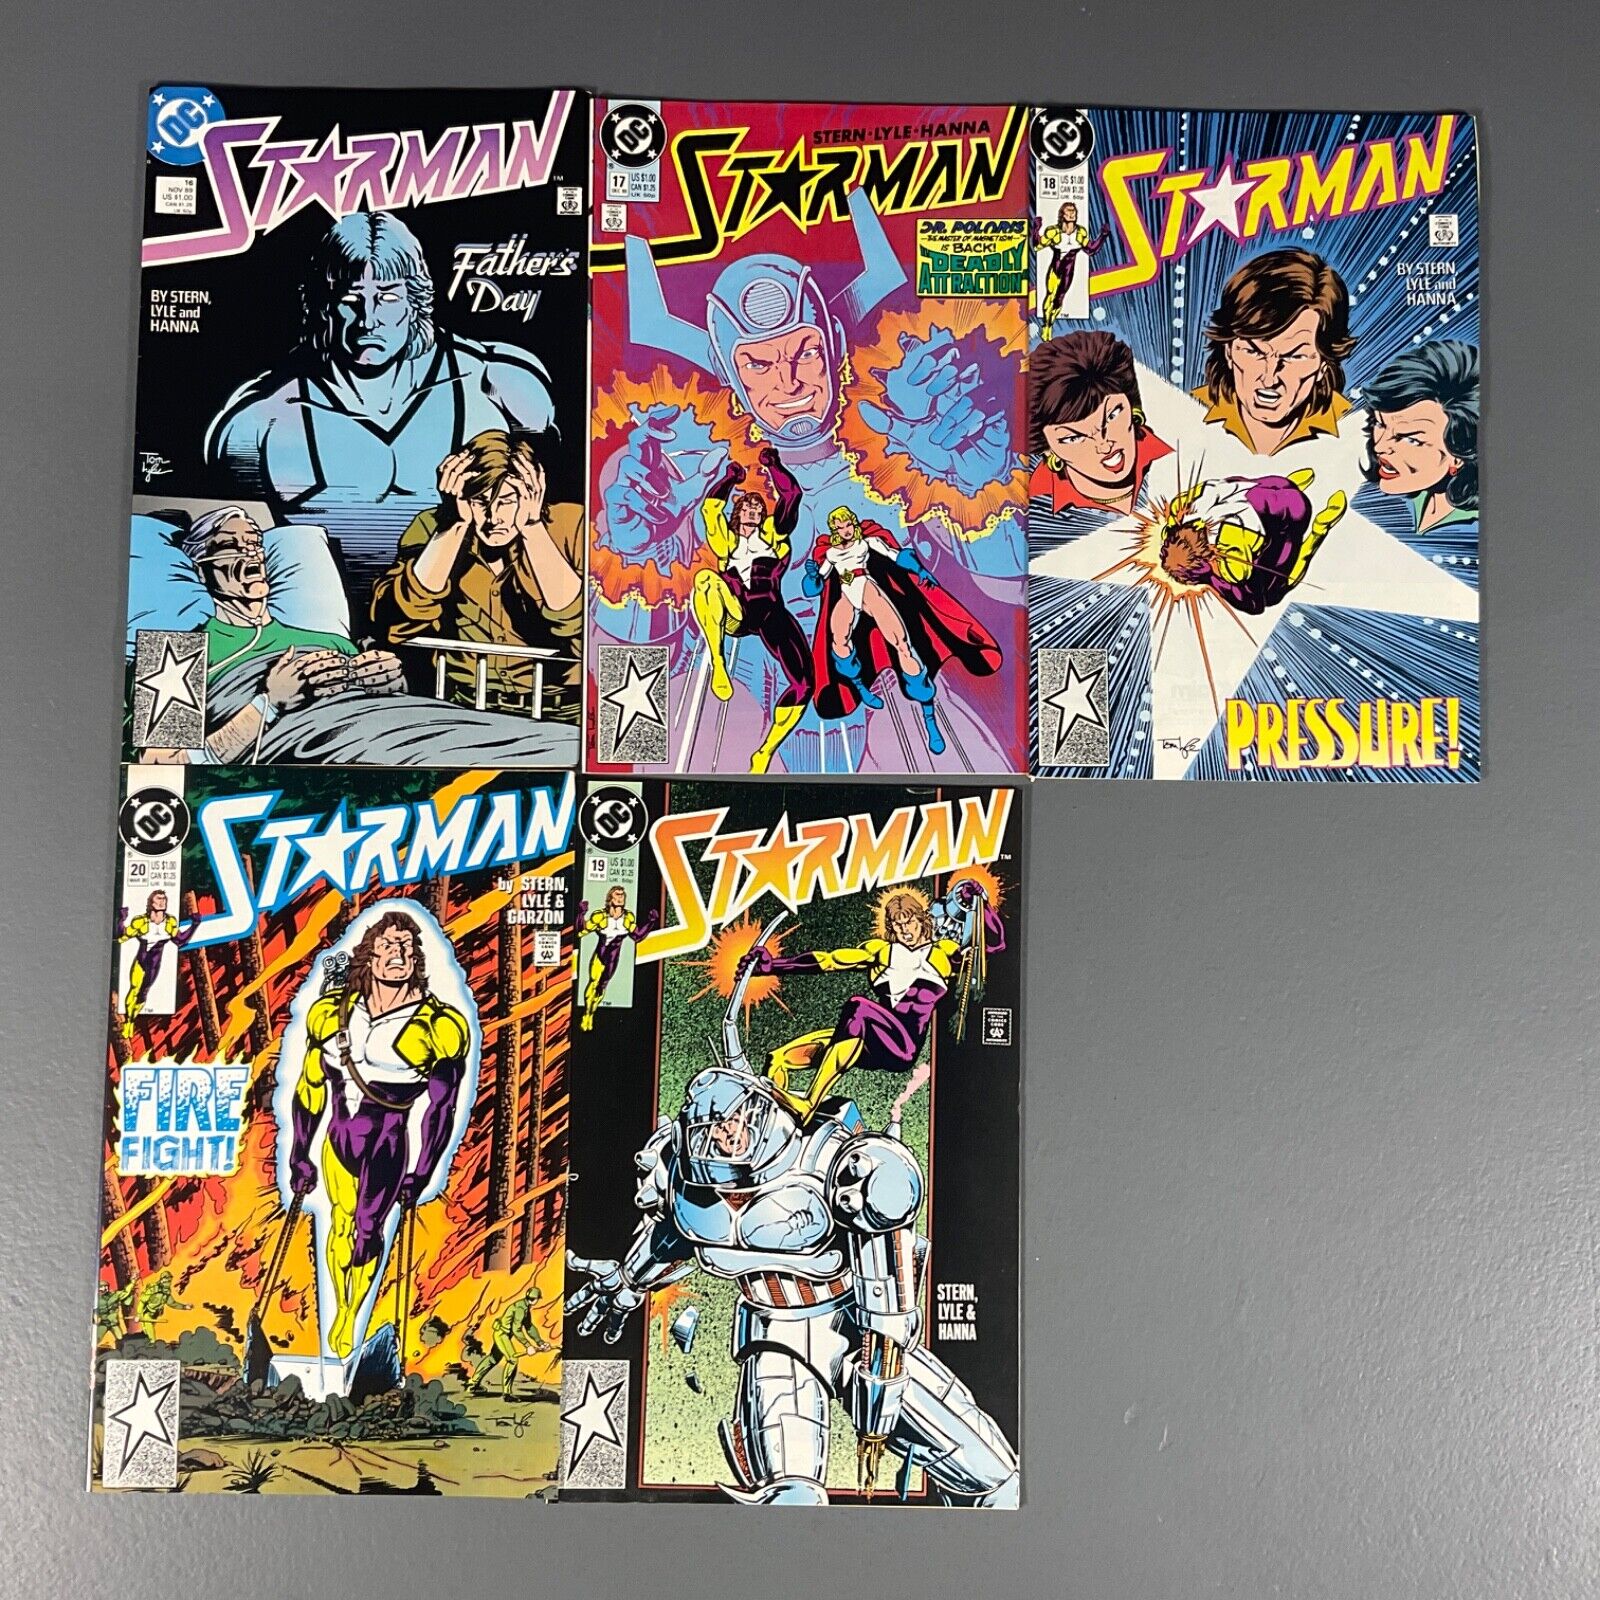 LOT OF 5 - Starman Vintage DC Universe Comic Books Issues #16-20 - 1989-90